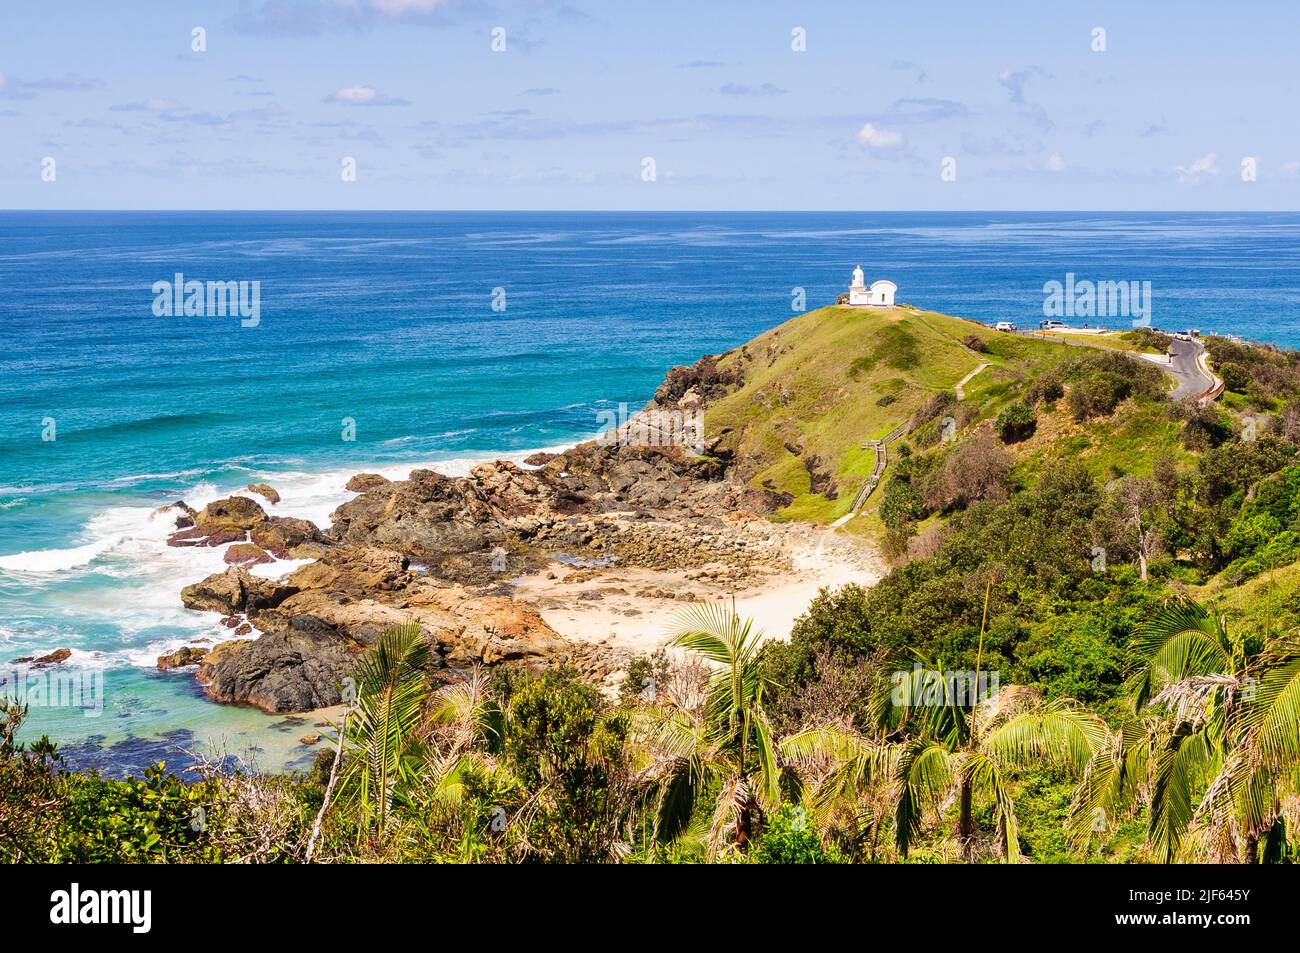 The picturesque Tacking Point Lighthouse - Port Macquarie, NSW, Australia Stock Photo